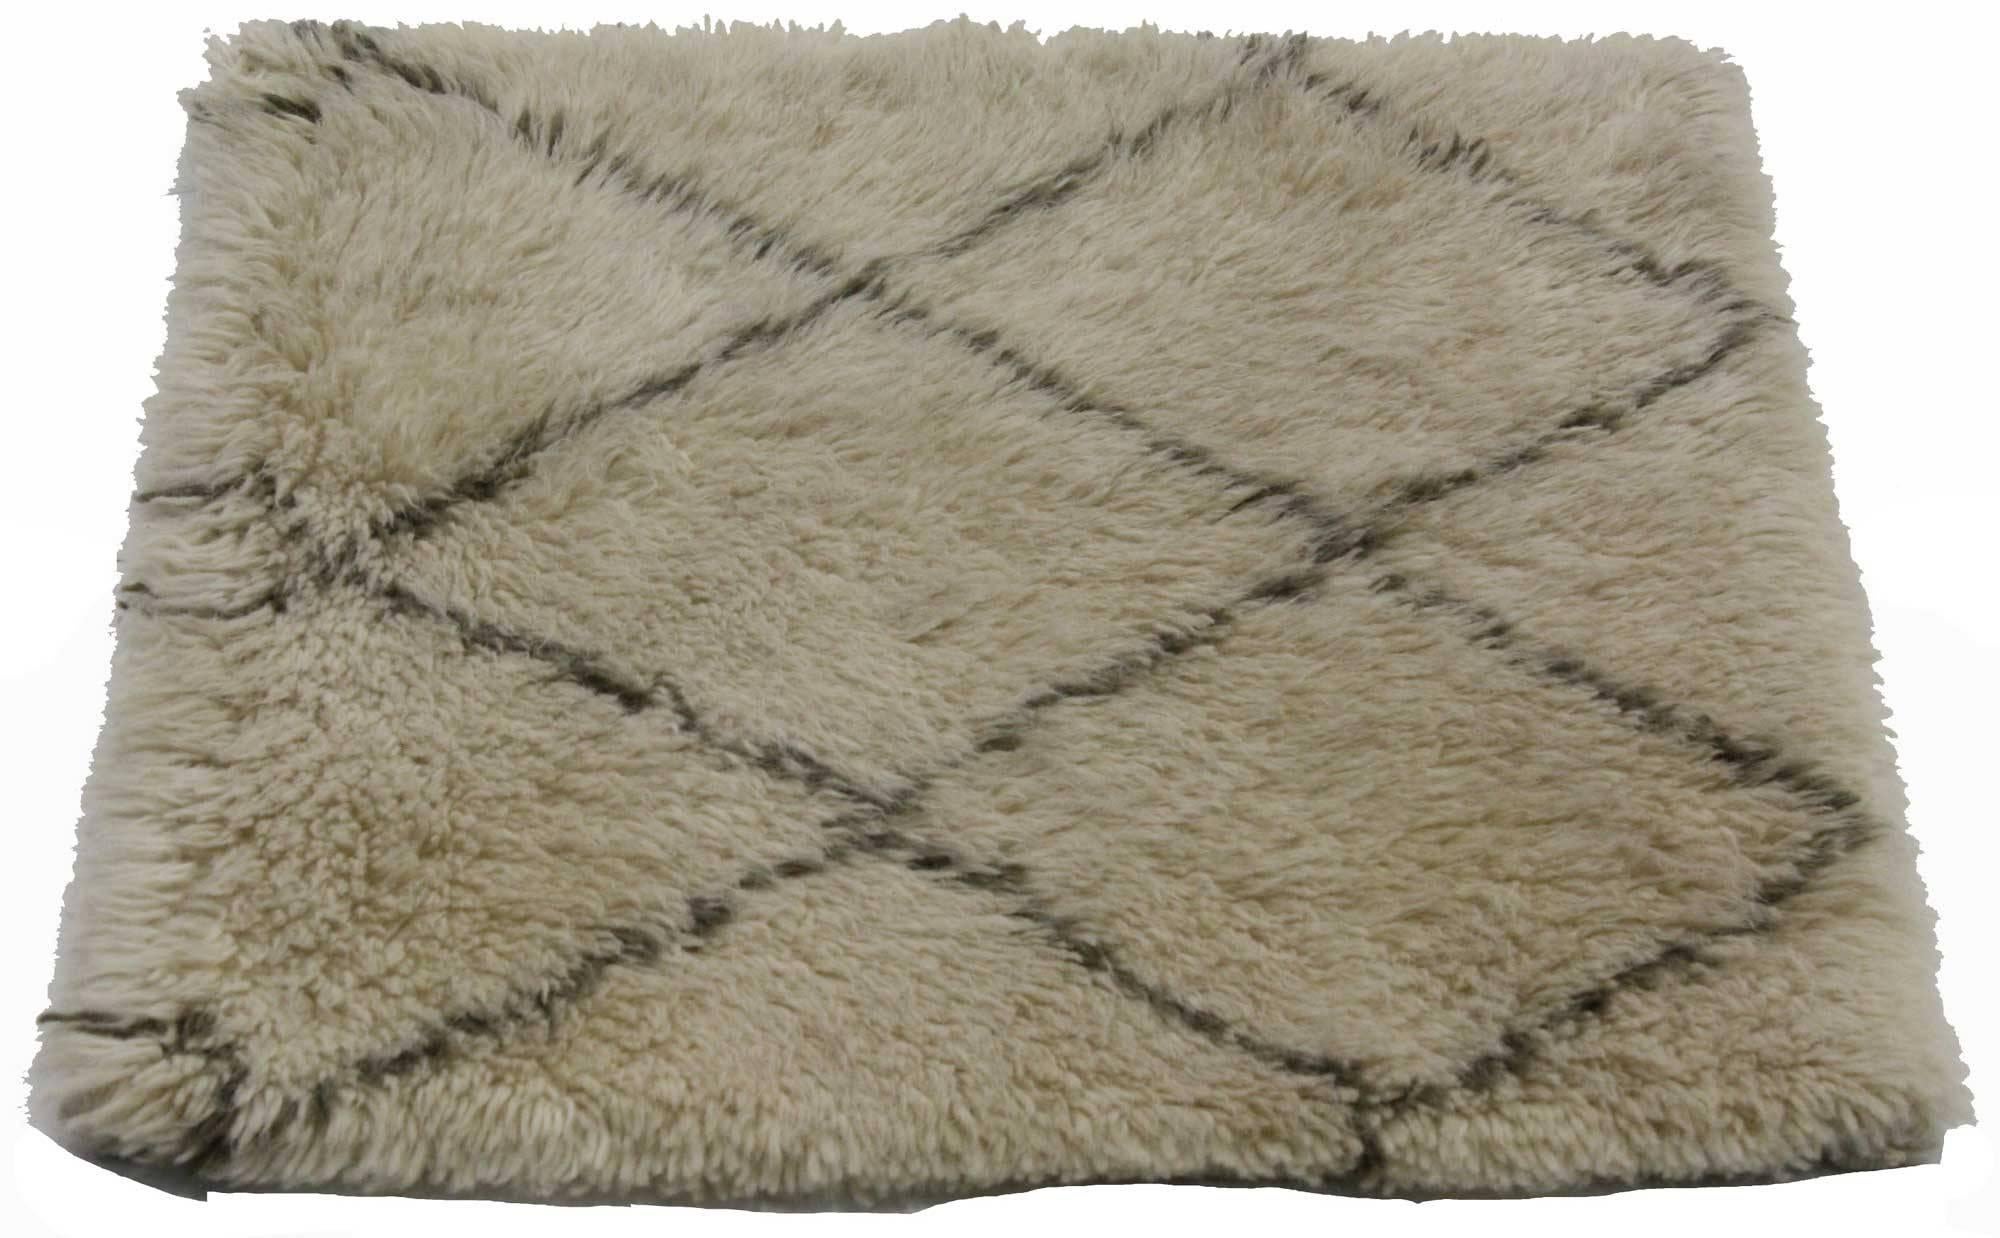 76718, Modern Moroccan style Accent rug. This Moroccan style accent rug with modern style features well defined lines creating an all-over lozenge pattern. Clean and simple, this Moroccan style rug combines warmth and comfort with modern style.